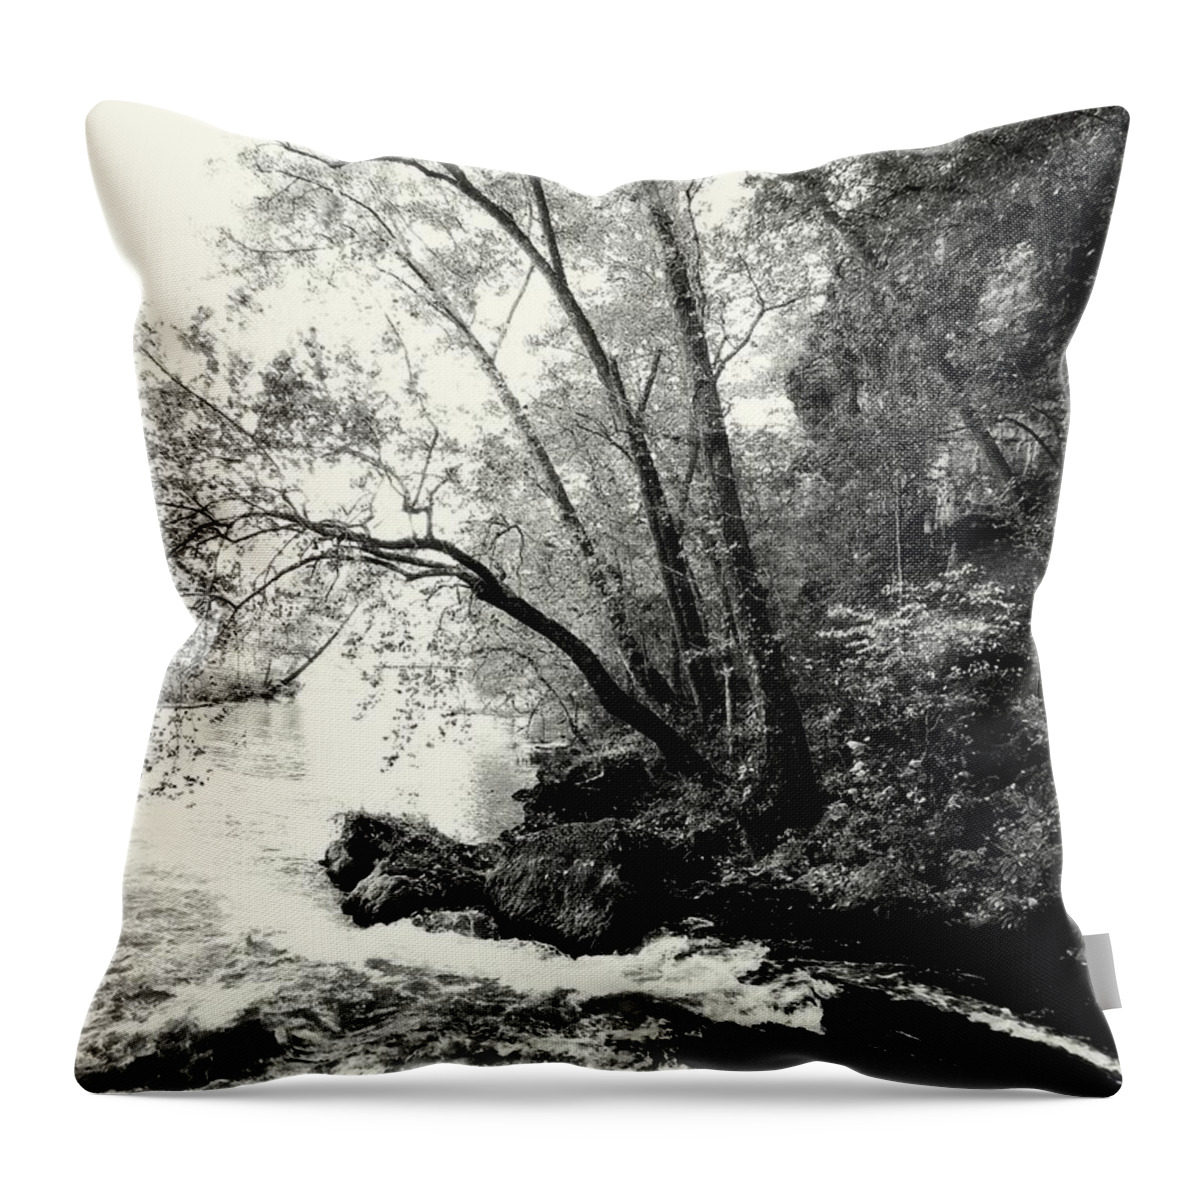 Black And White Throw Pillow featuring the photograph Big Spring In B and W by Marty Koch